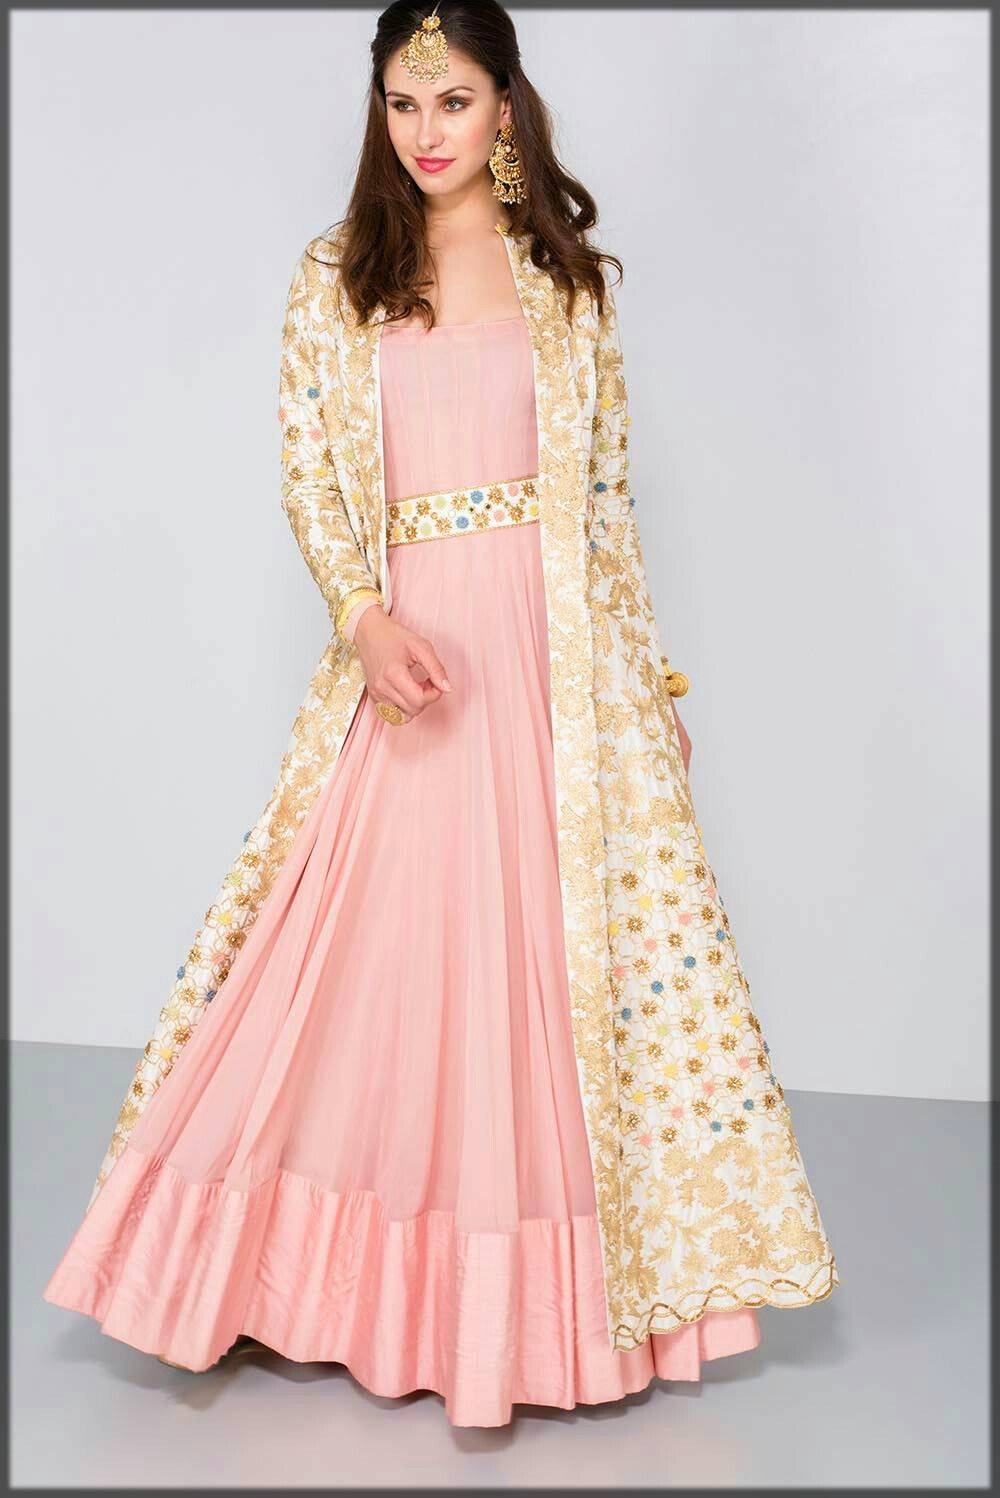 Gown with Long Jacket for Wedding